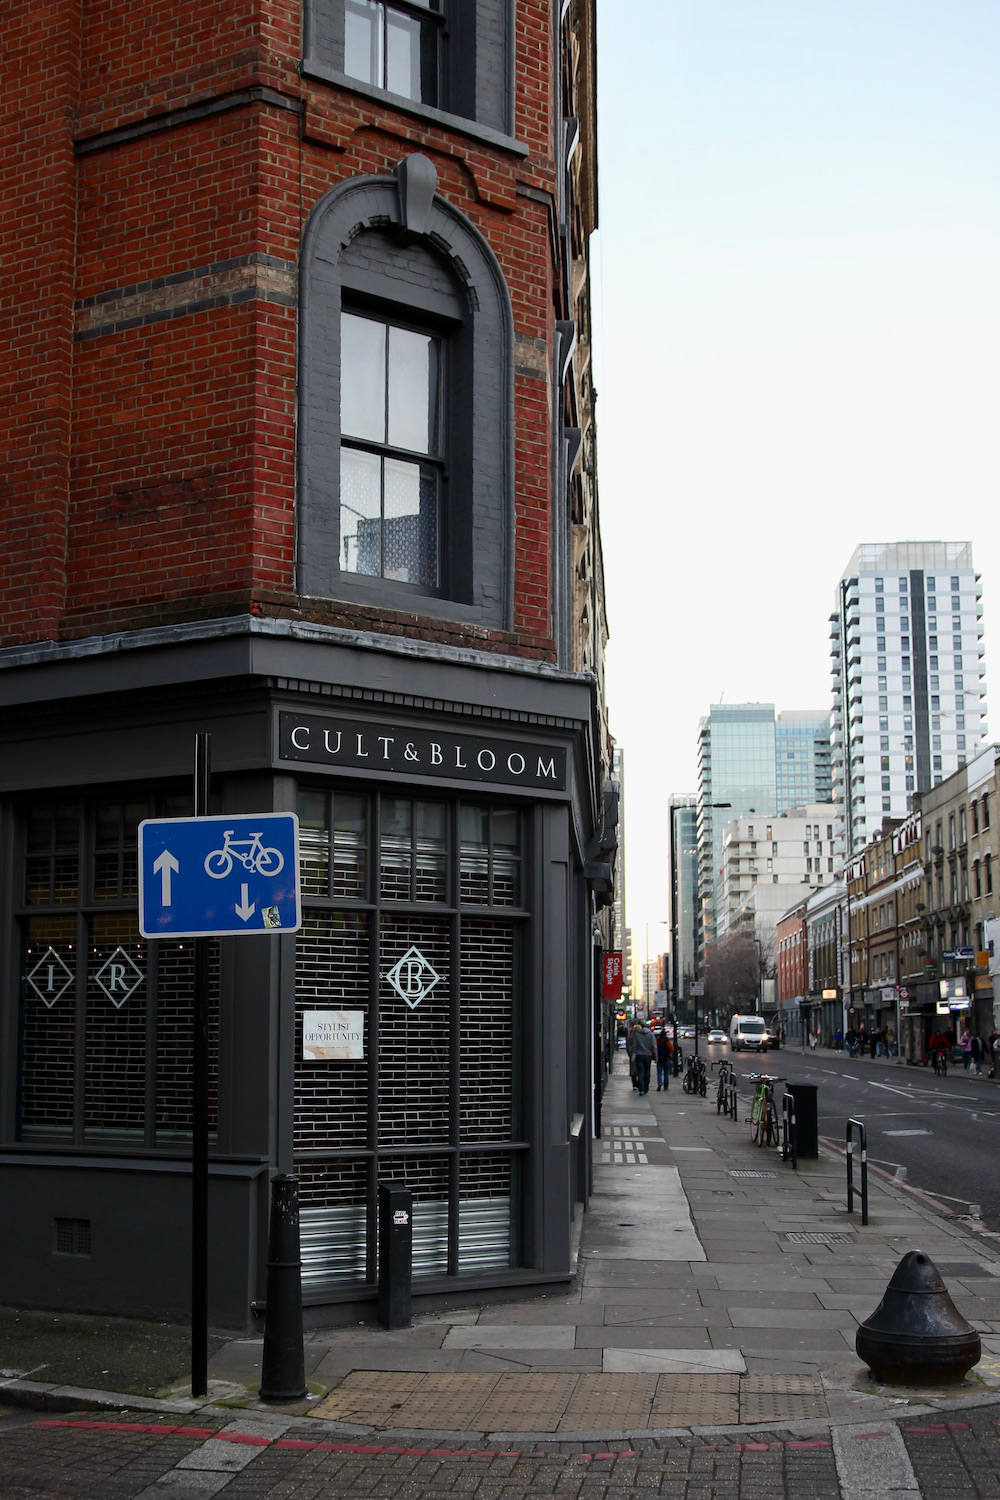 The corner of Fashion Street, outside the Cult and Bloom storefront, Whitechapel.